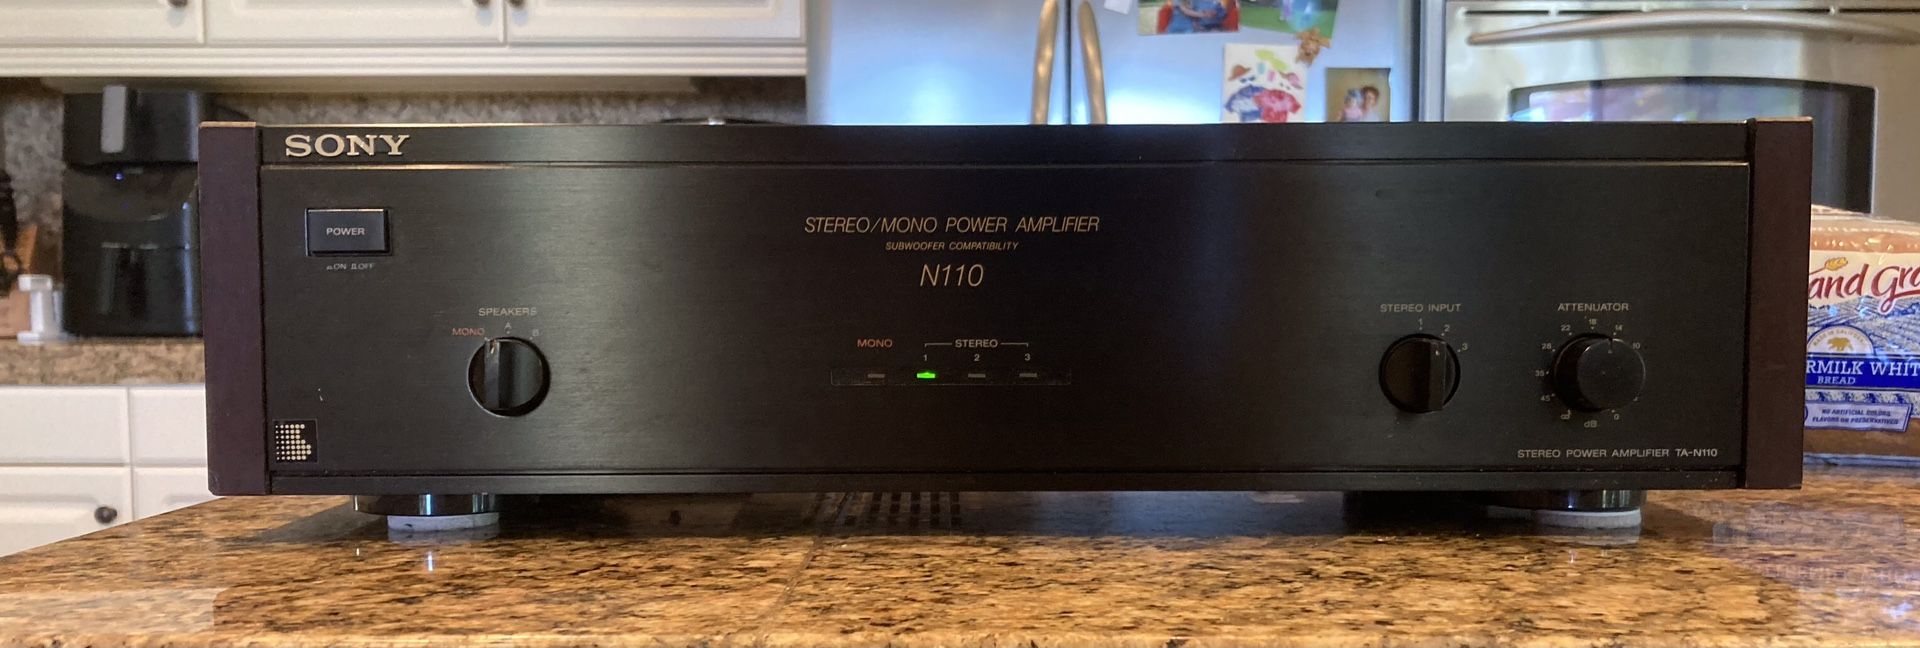 Sony N110 Stereo/Mono (subwoofer) Amplifier - Working!